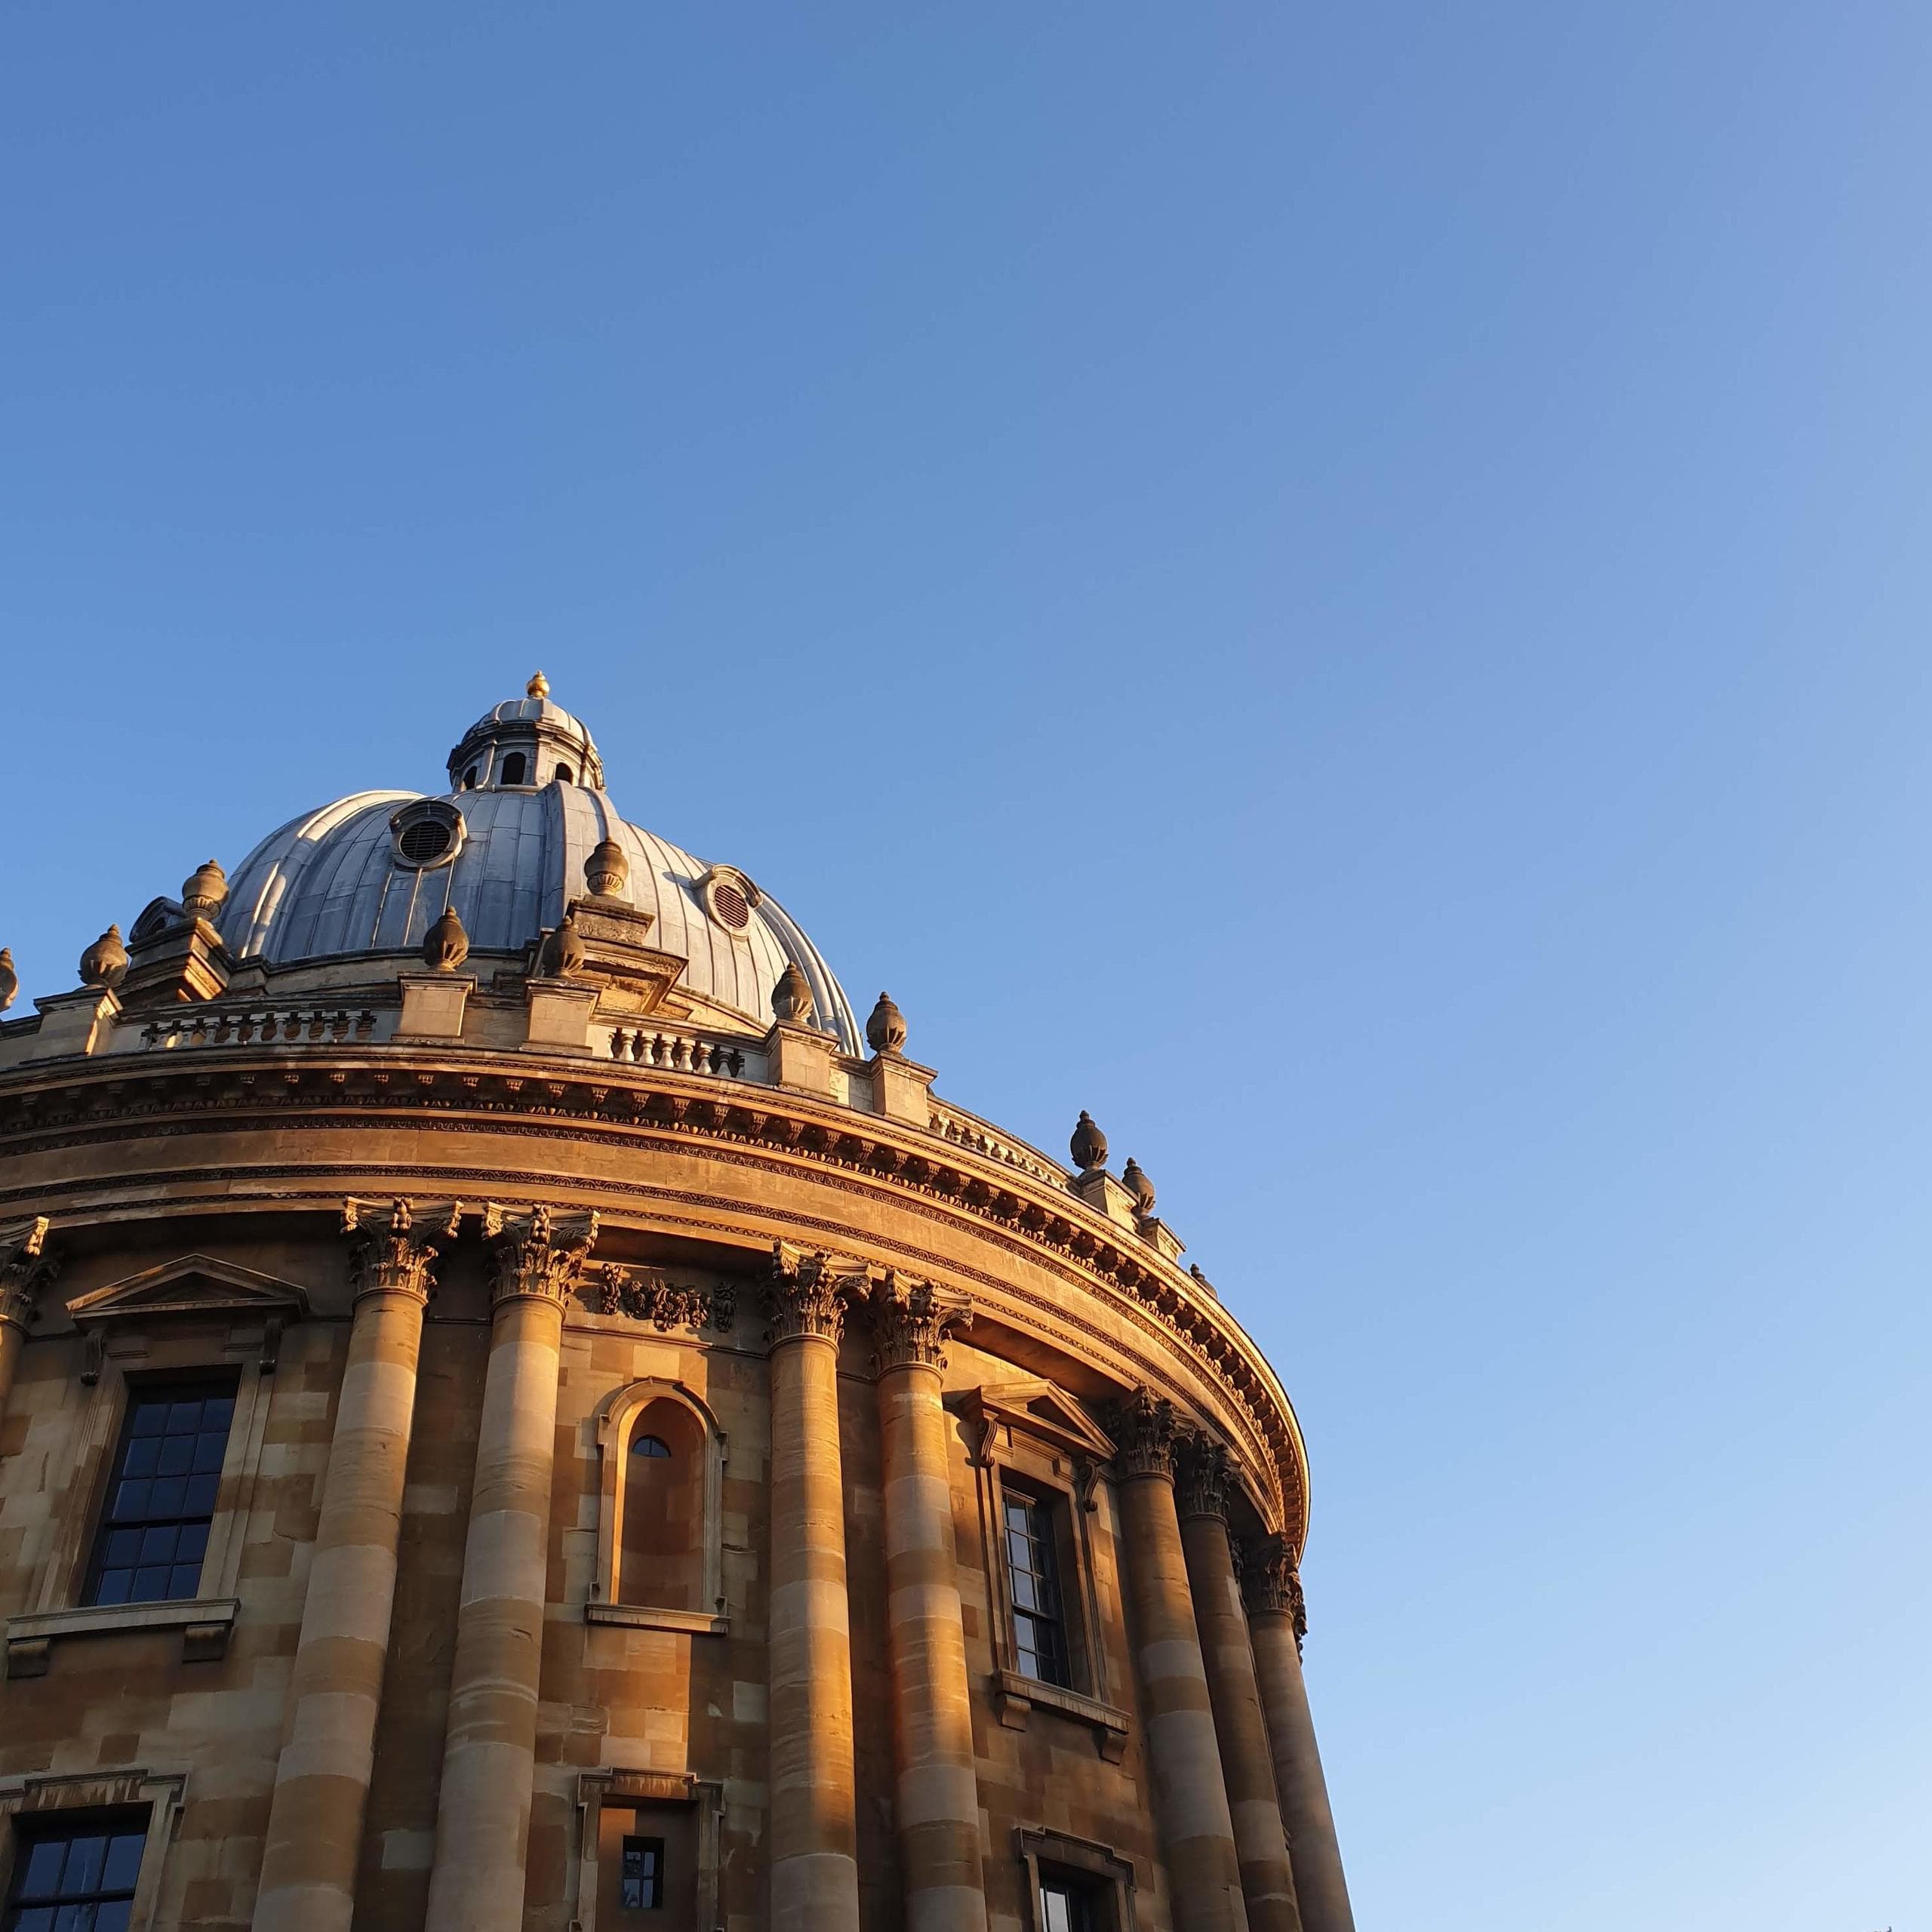 Looking up at the Radcliffe Camera building against blue sky, the builidng has an ornate facade.